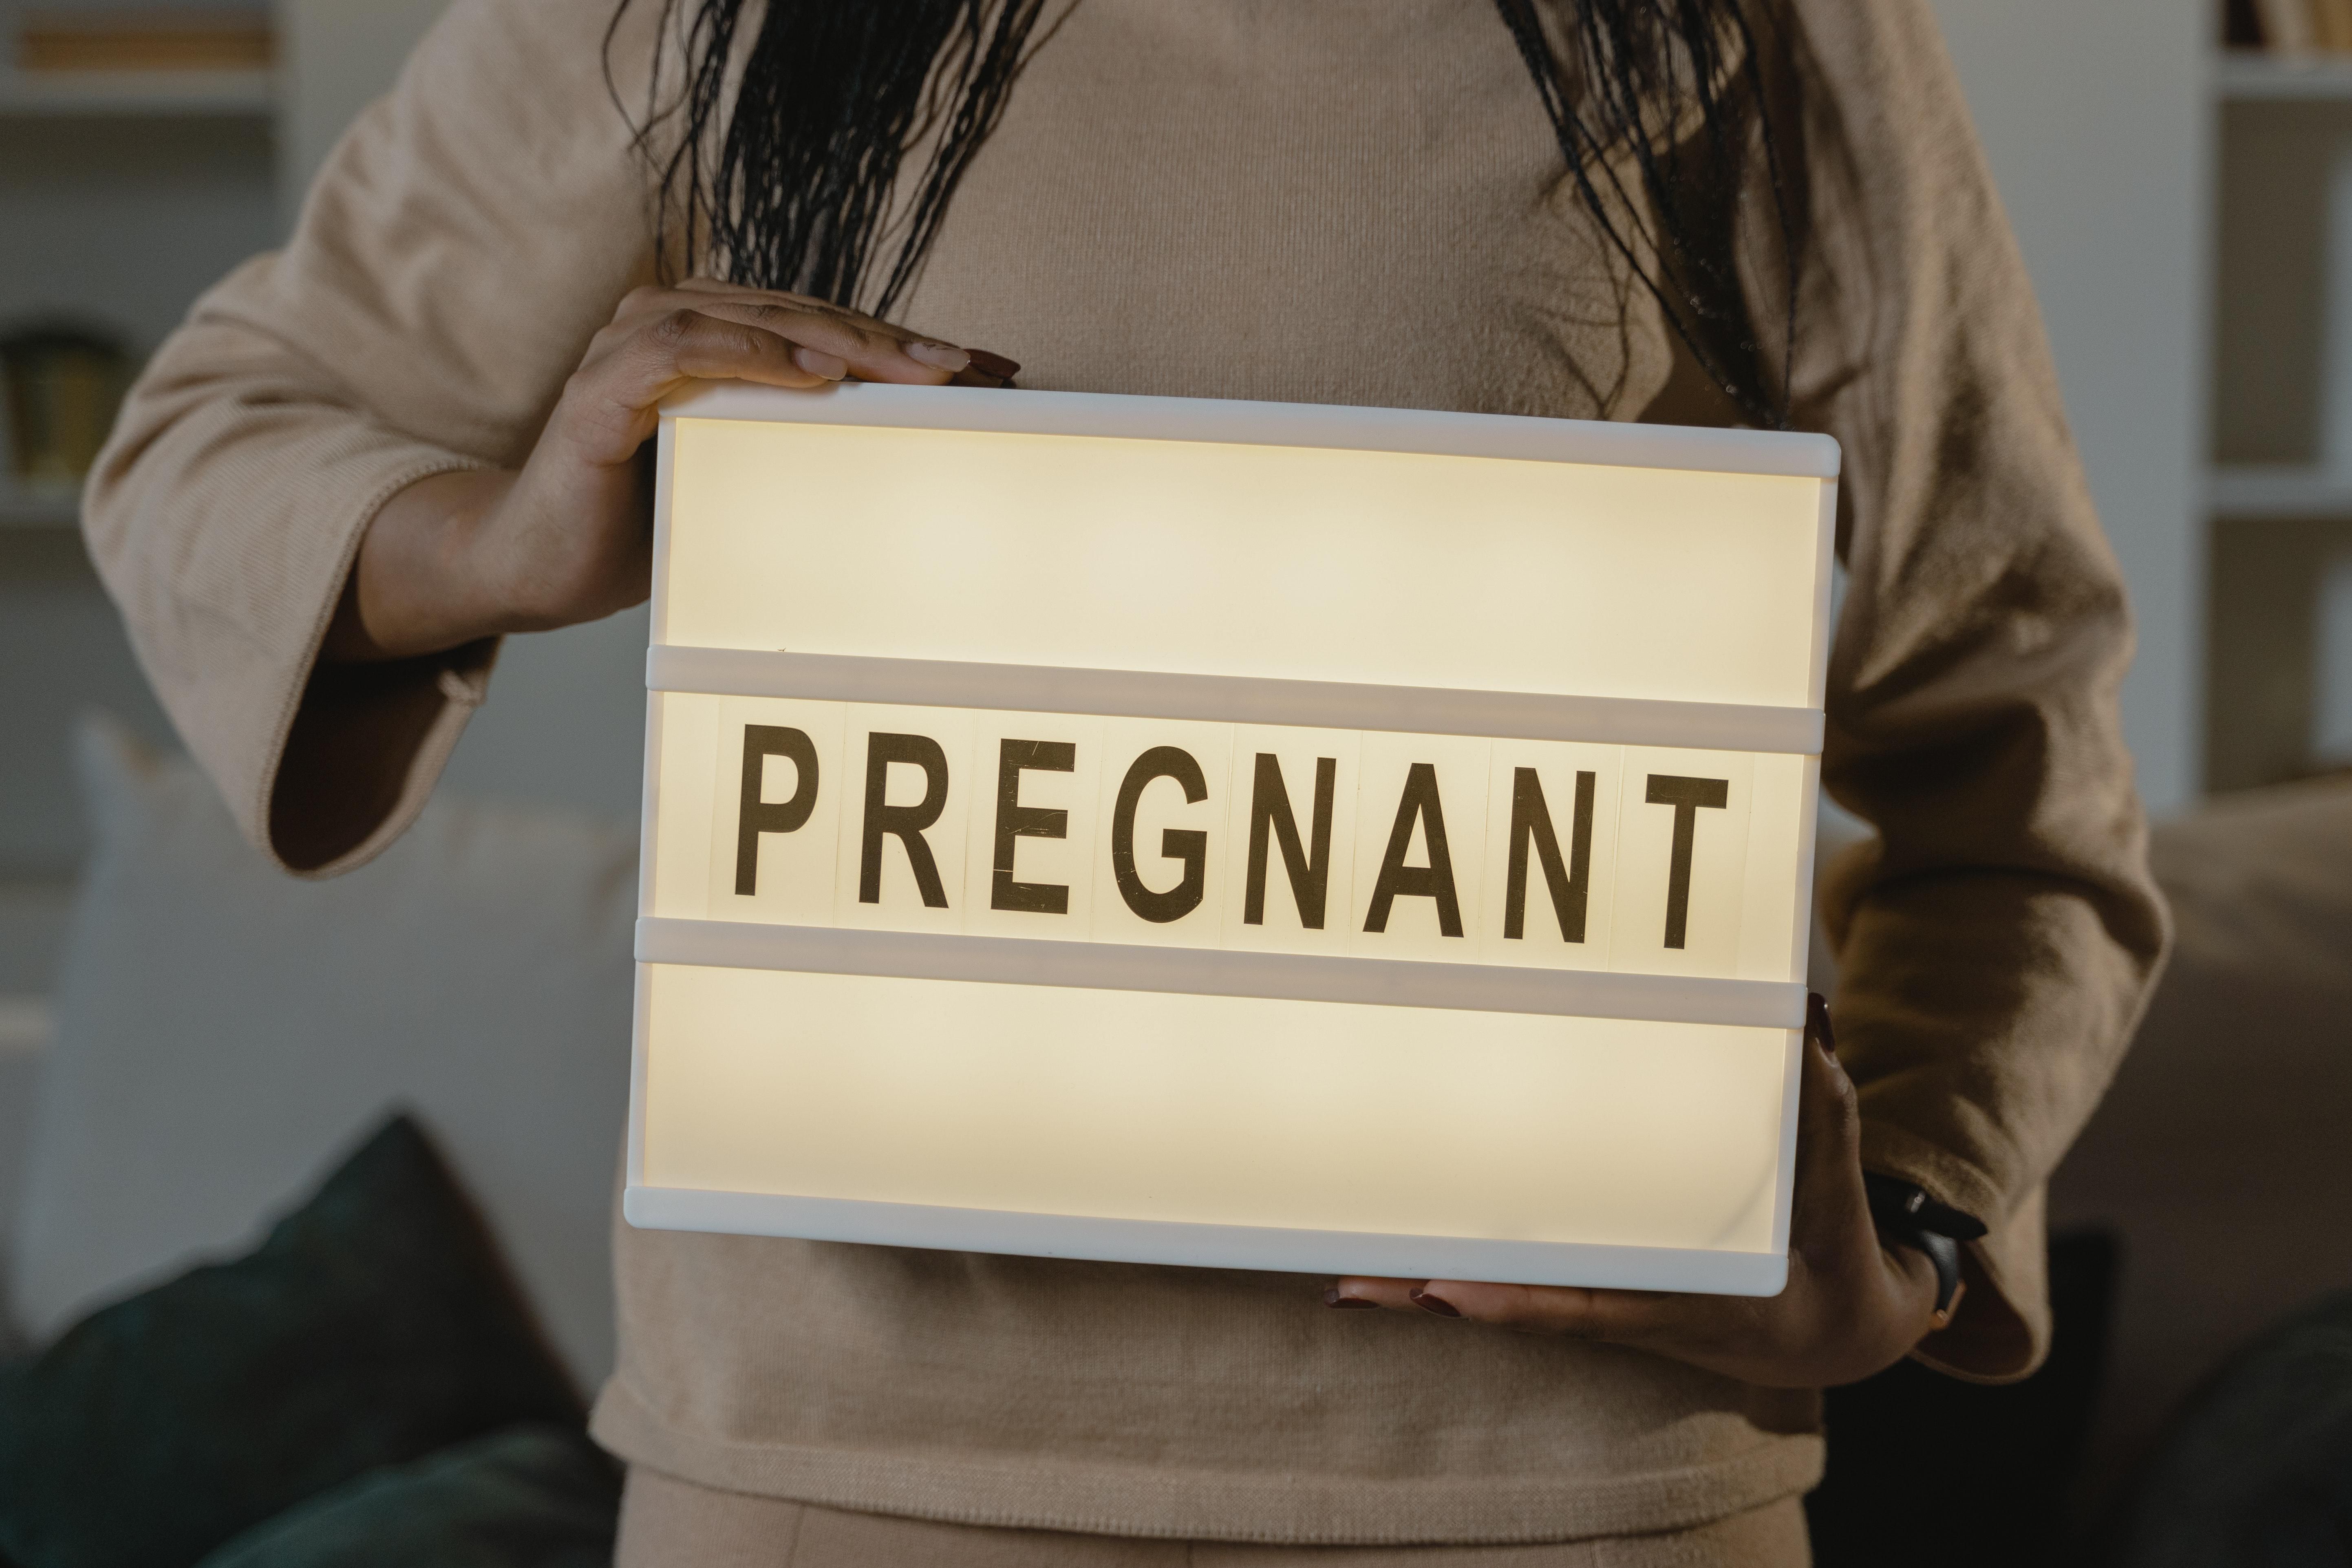 Woman Holding A Box With Pregnant Text